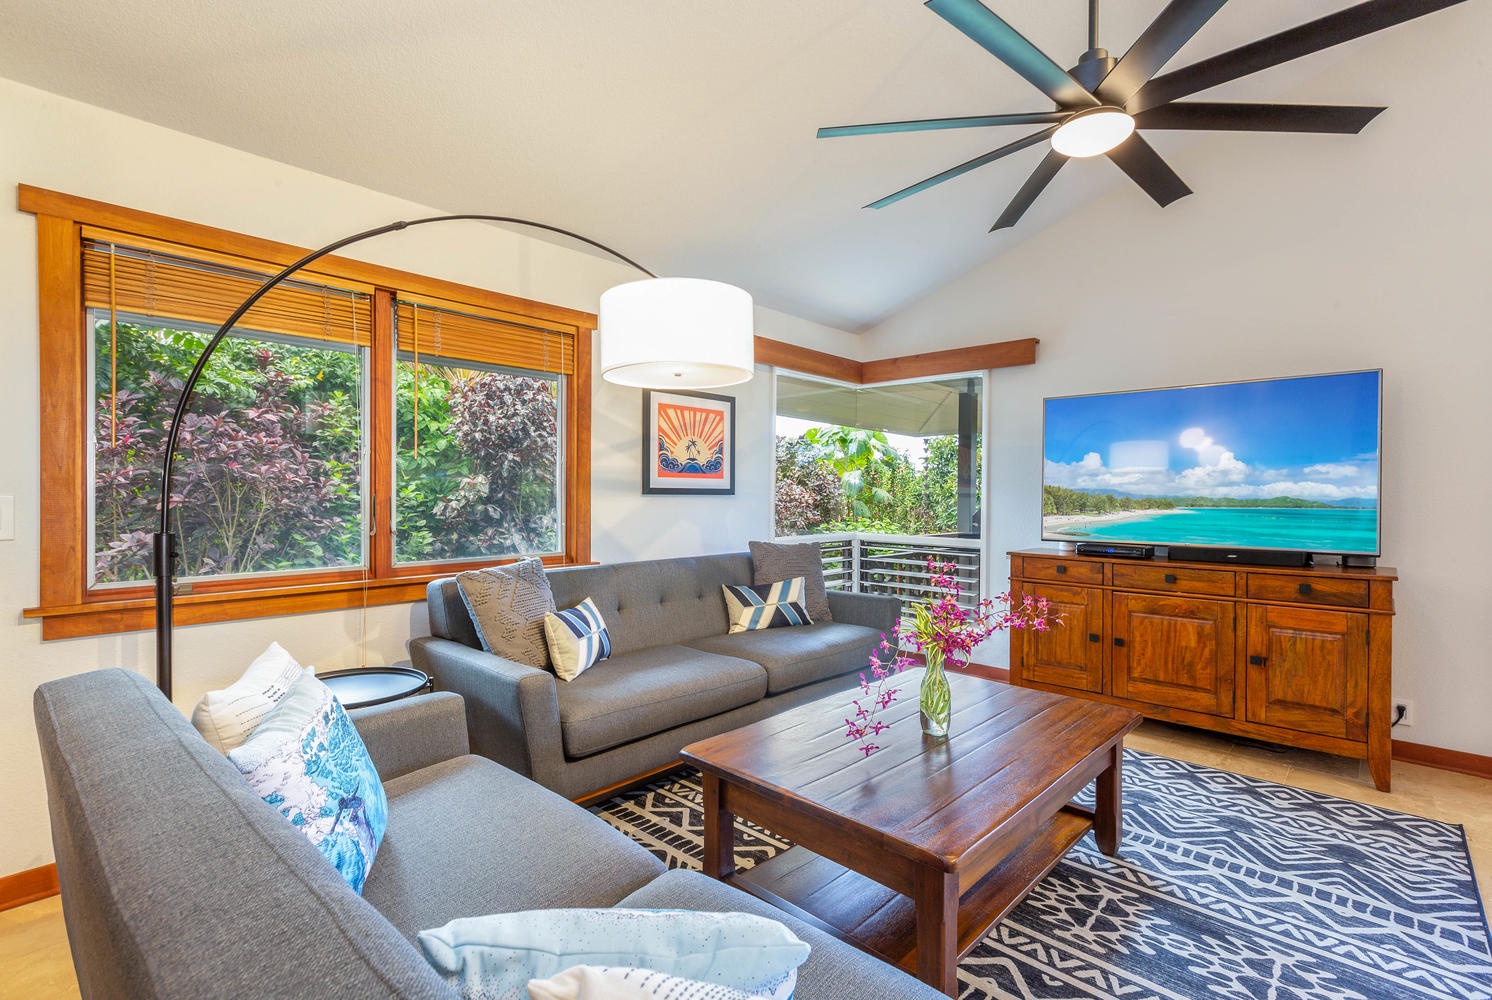 Princeville Vacation Rentals, Makana Lei - Comfortable seating and large television in the living area